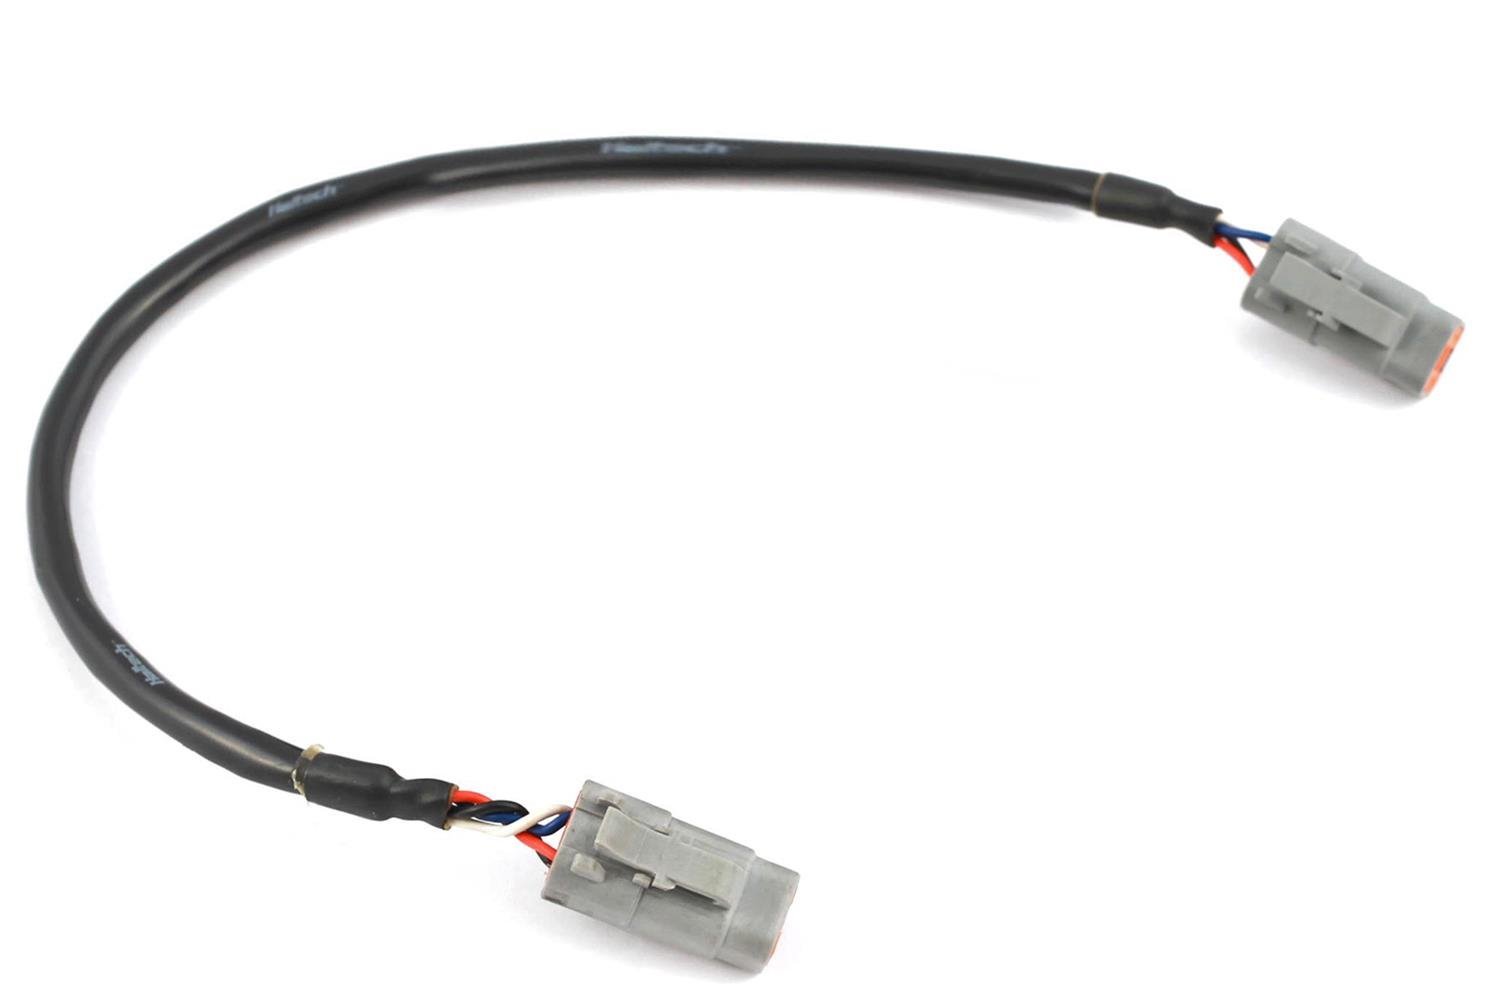 HT-130025 Elite CAN Cable, DTM-4 to DTM-4, 1200 mm (48 in.)